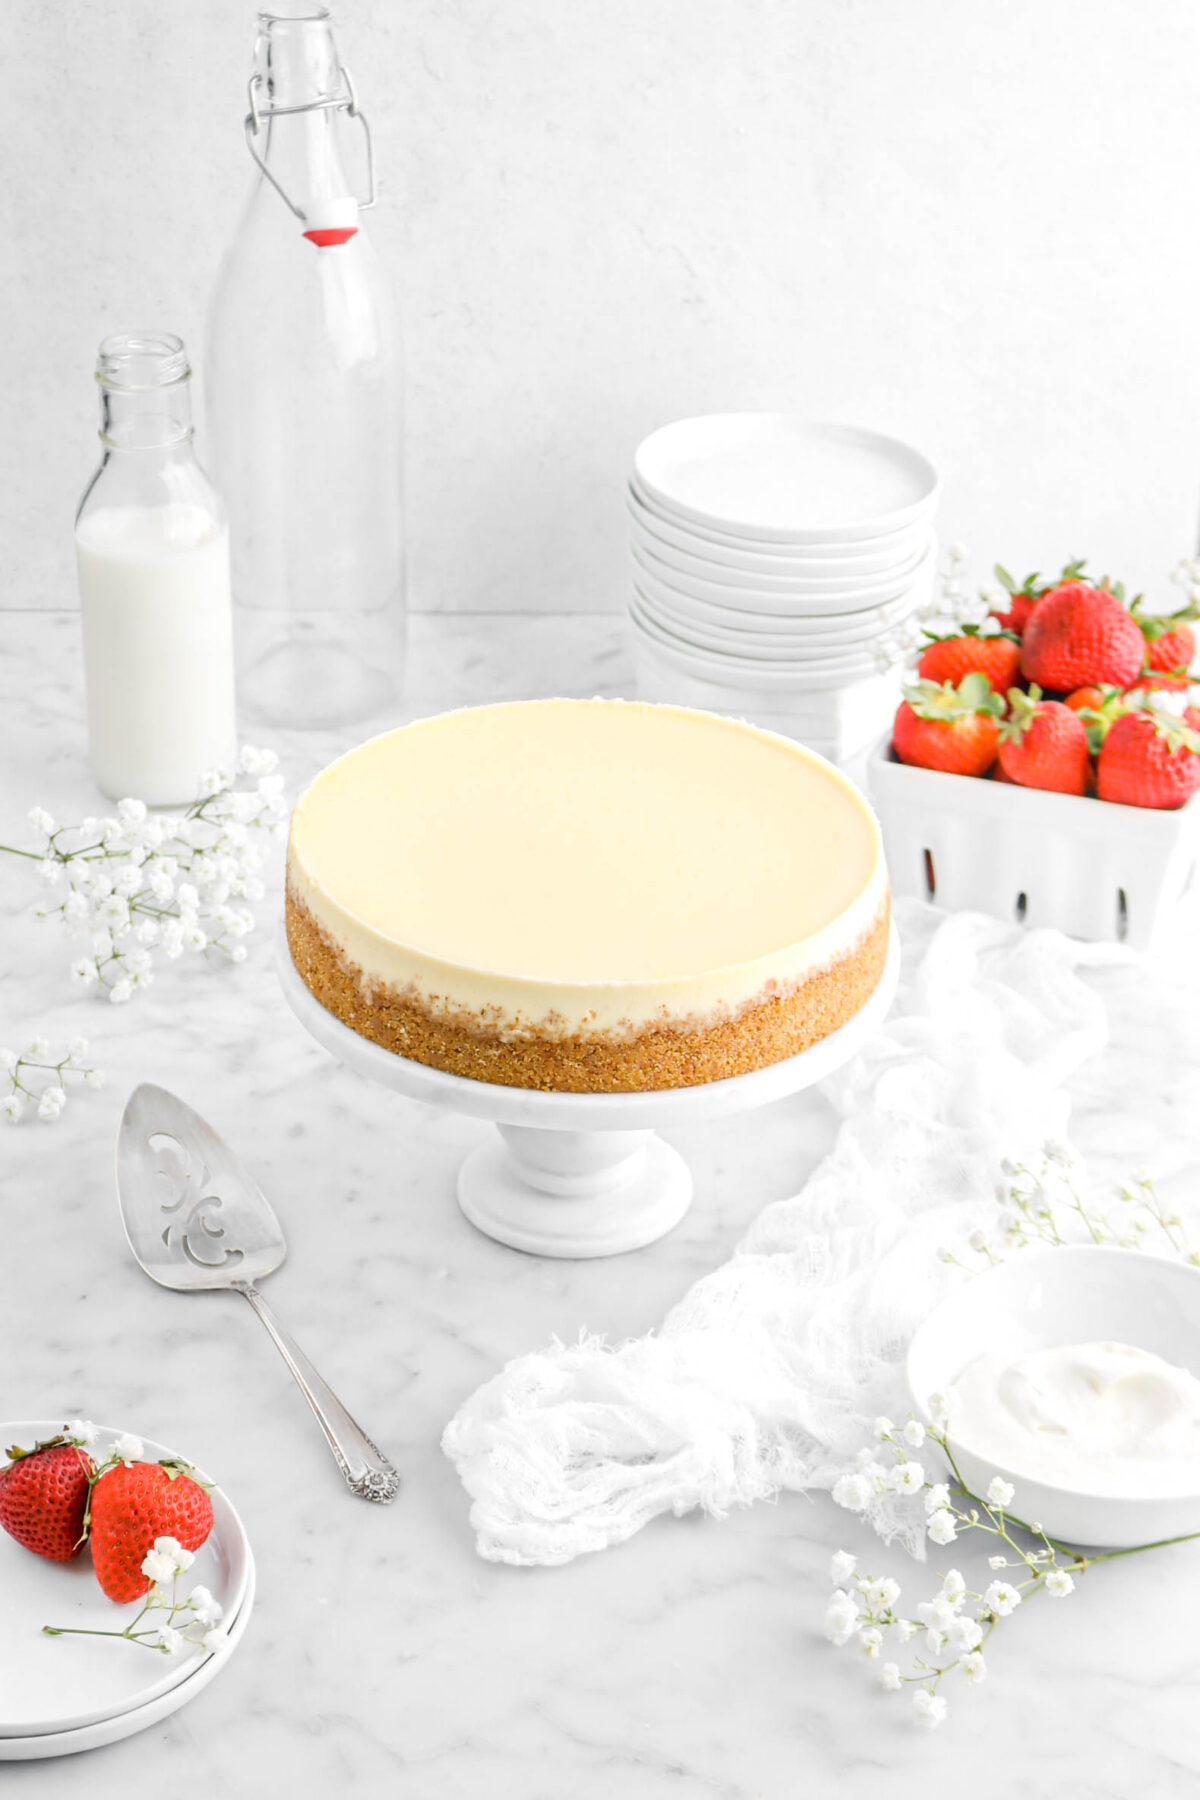 pulled back angled shot of cheesecake with plates, strawberries, flowers, cake knife, napkin, and bowl of whipped cream beside, strawberries, stack of plates, and a glass of milk behind